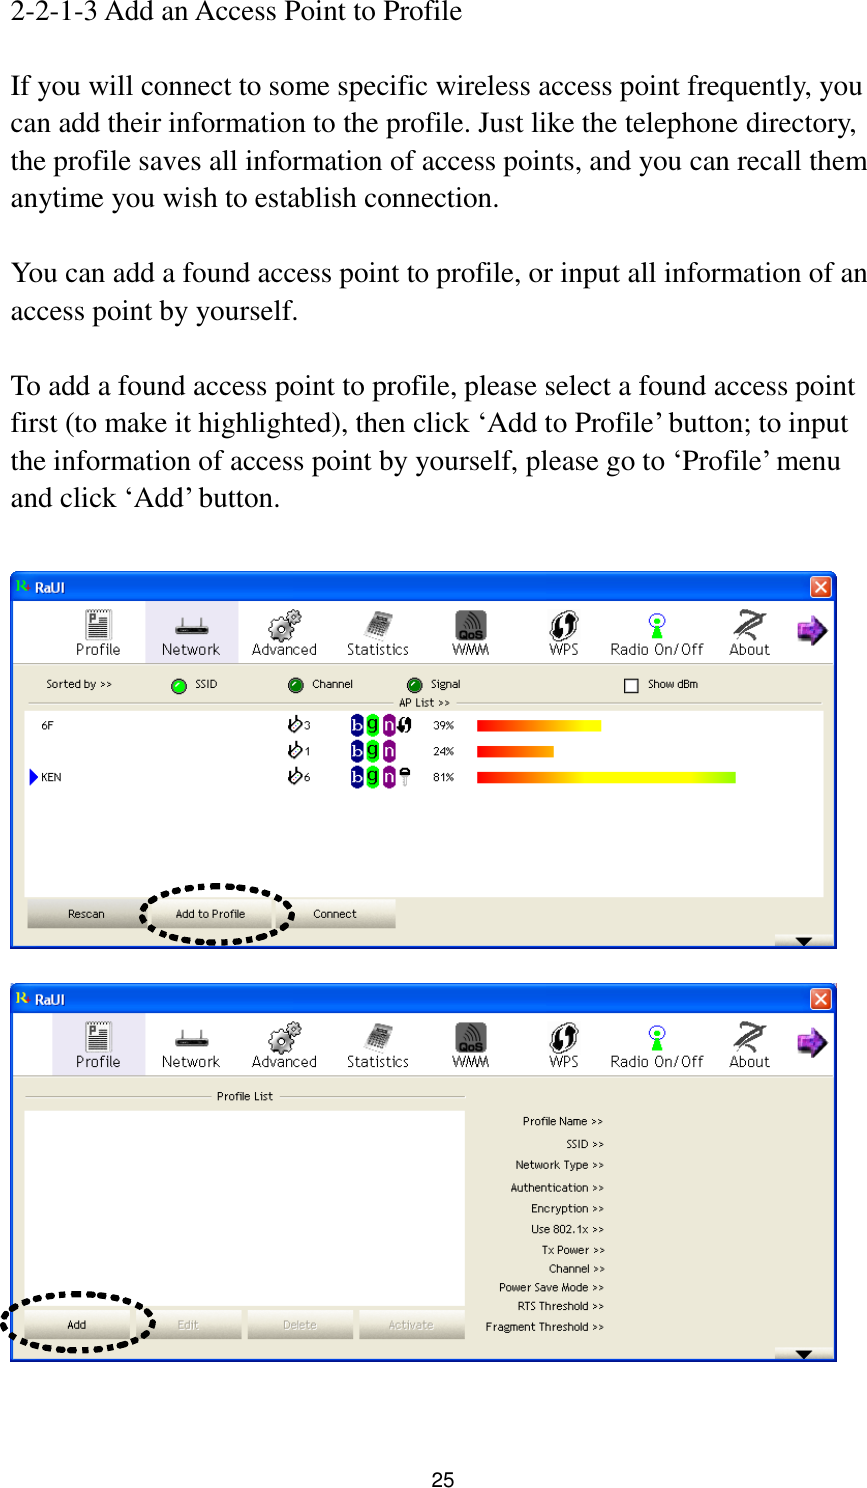  25 2-2-1-3 Add an Access Point to Profile  If you will connect to some specific wireless access point frequently, you can add their information to the profile. Just like the telephone directory, the profile saves all information of access points, and you can recall them anytime you wish to establish connection.  You can add a found access point to profile, or input all information of an access point by yourself.    To add a found access point to profile, please select a found access point first (to make it highlighted), then click „Add to Profile‟ button; to input the information of access point by yourself, please go to „Profile‟ menu and click „Add‟ button.       